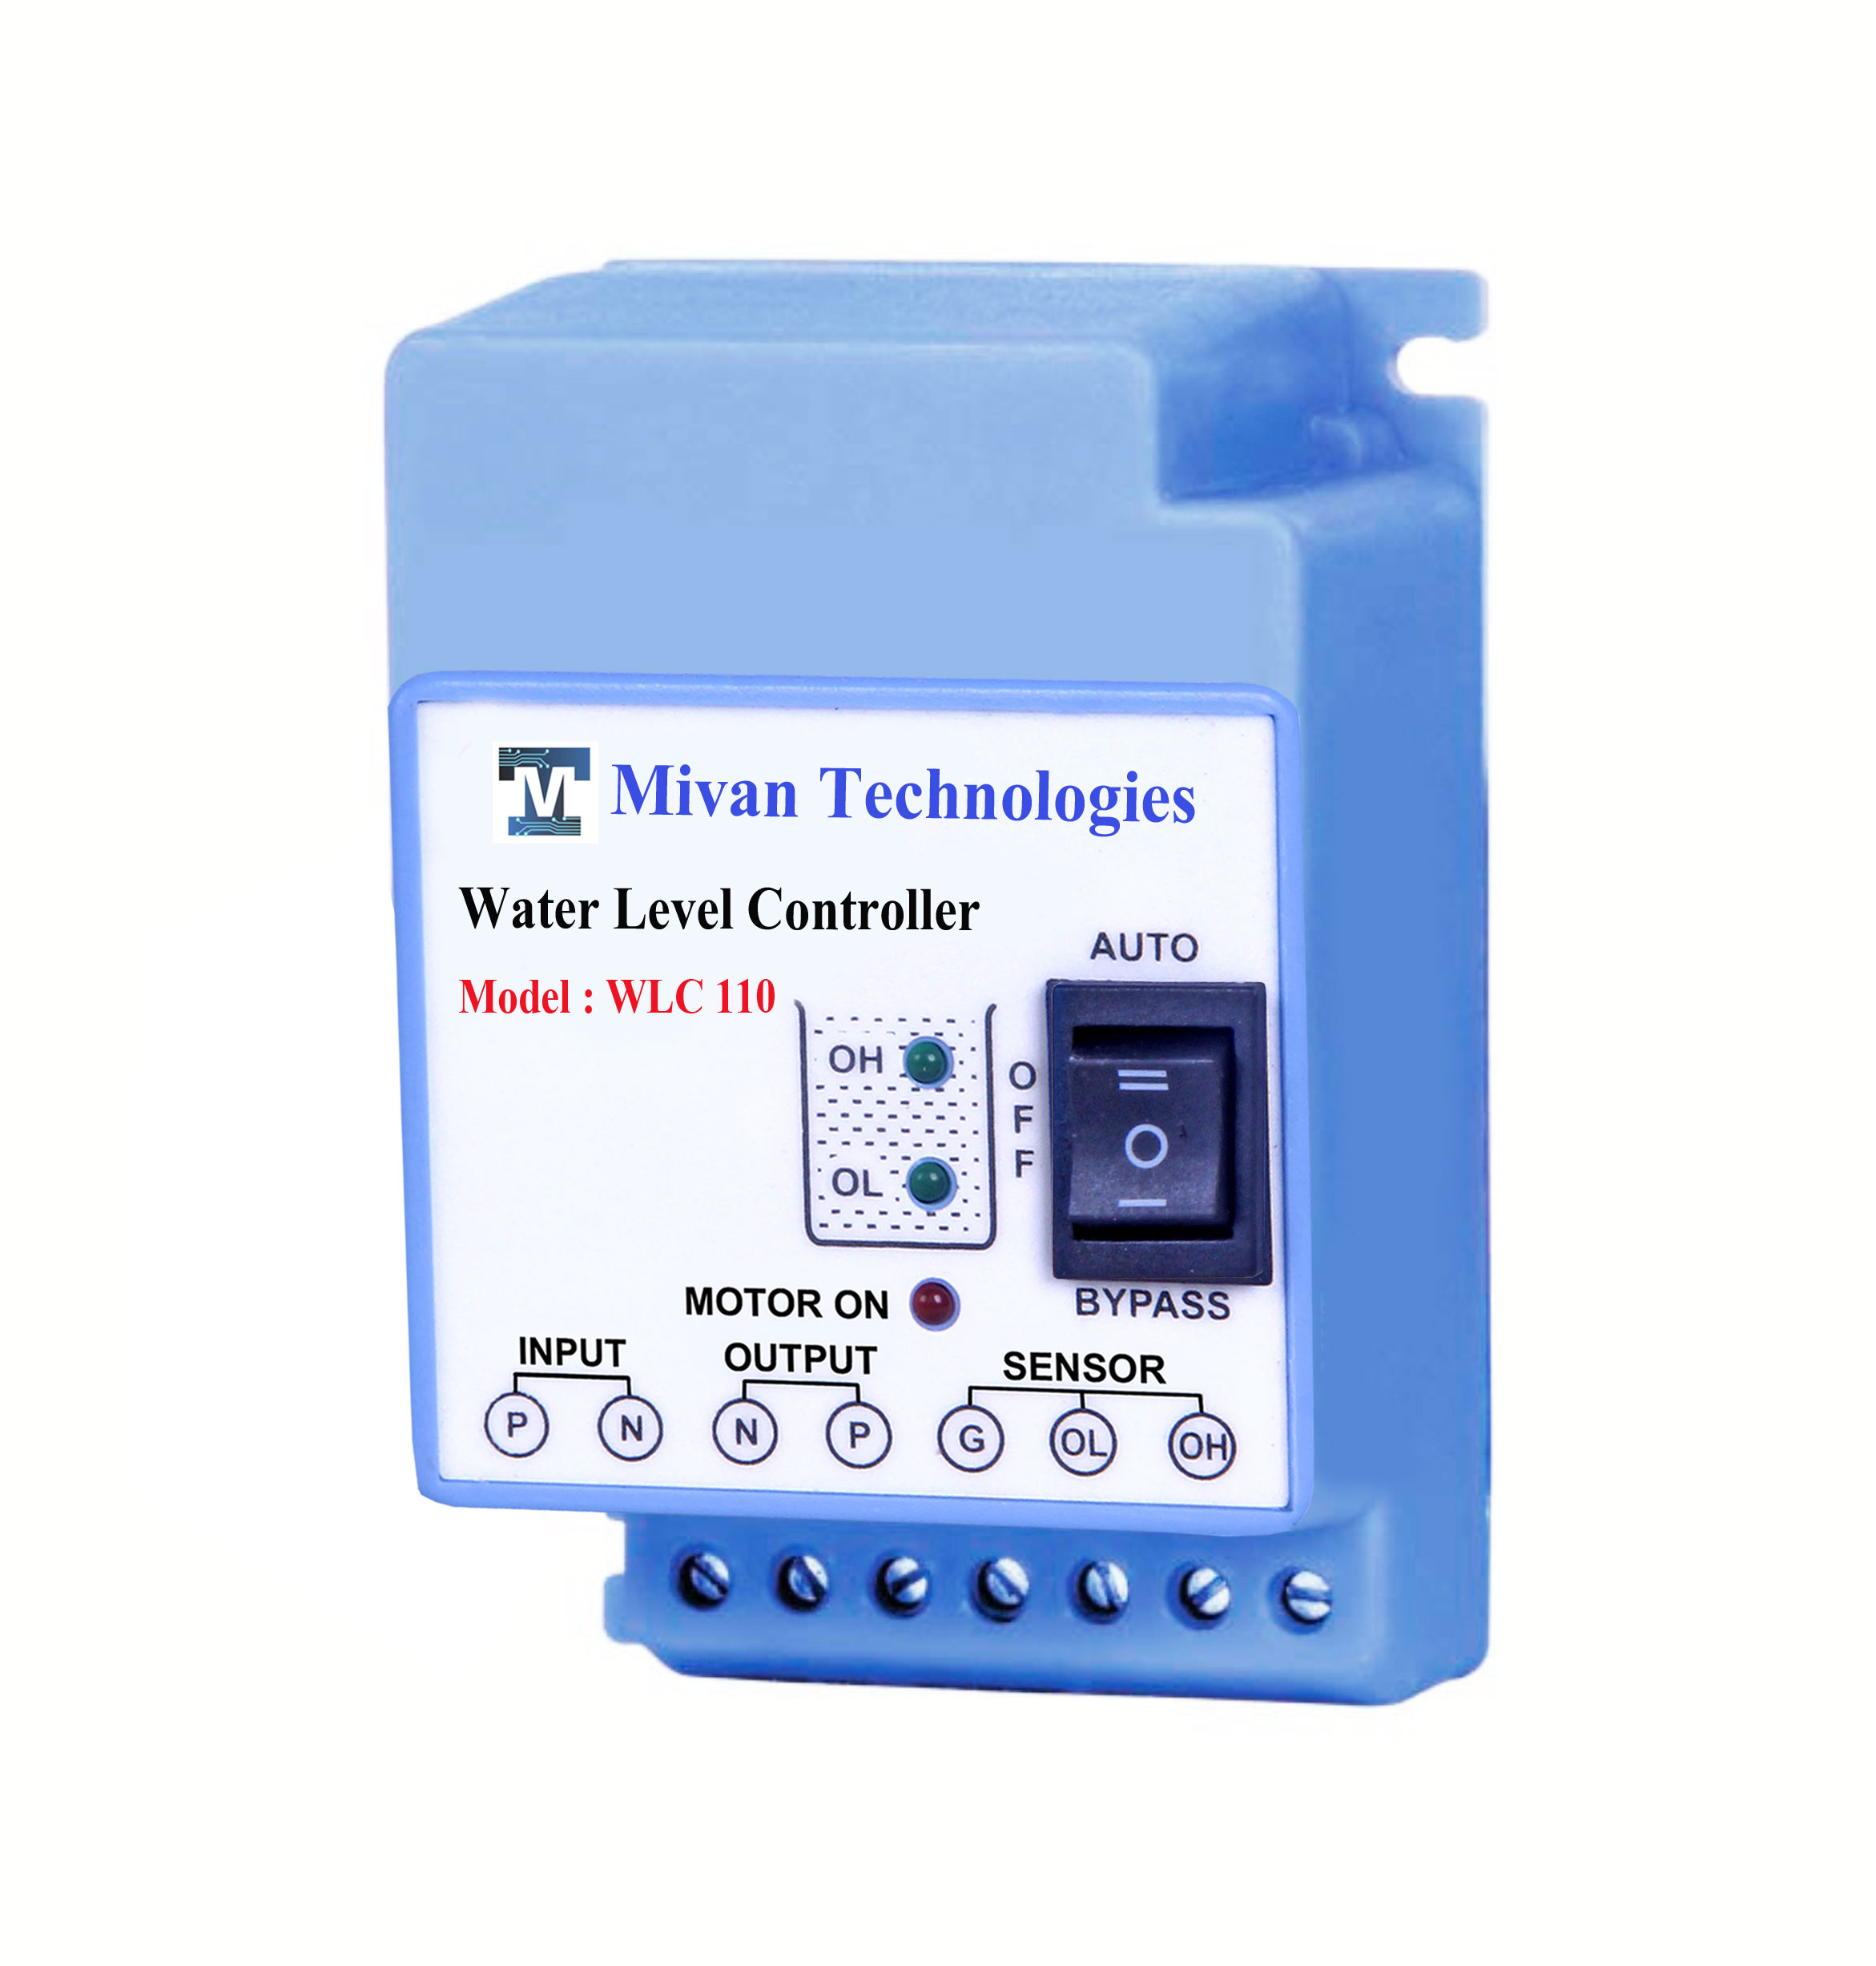 WLC 110 Water Level Controller and 3 sensors with water level indications fully automatic